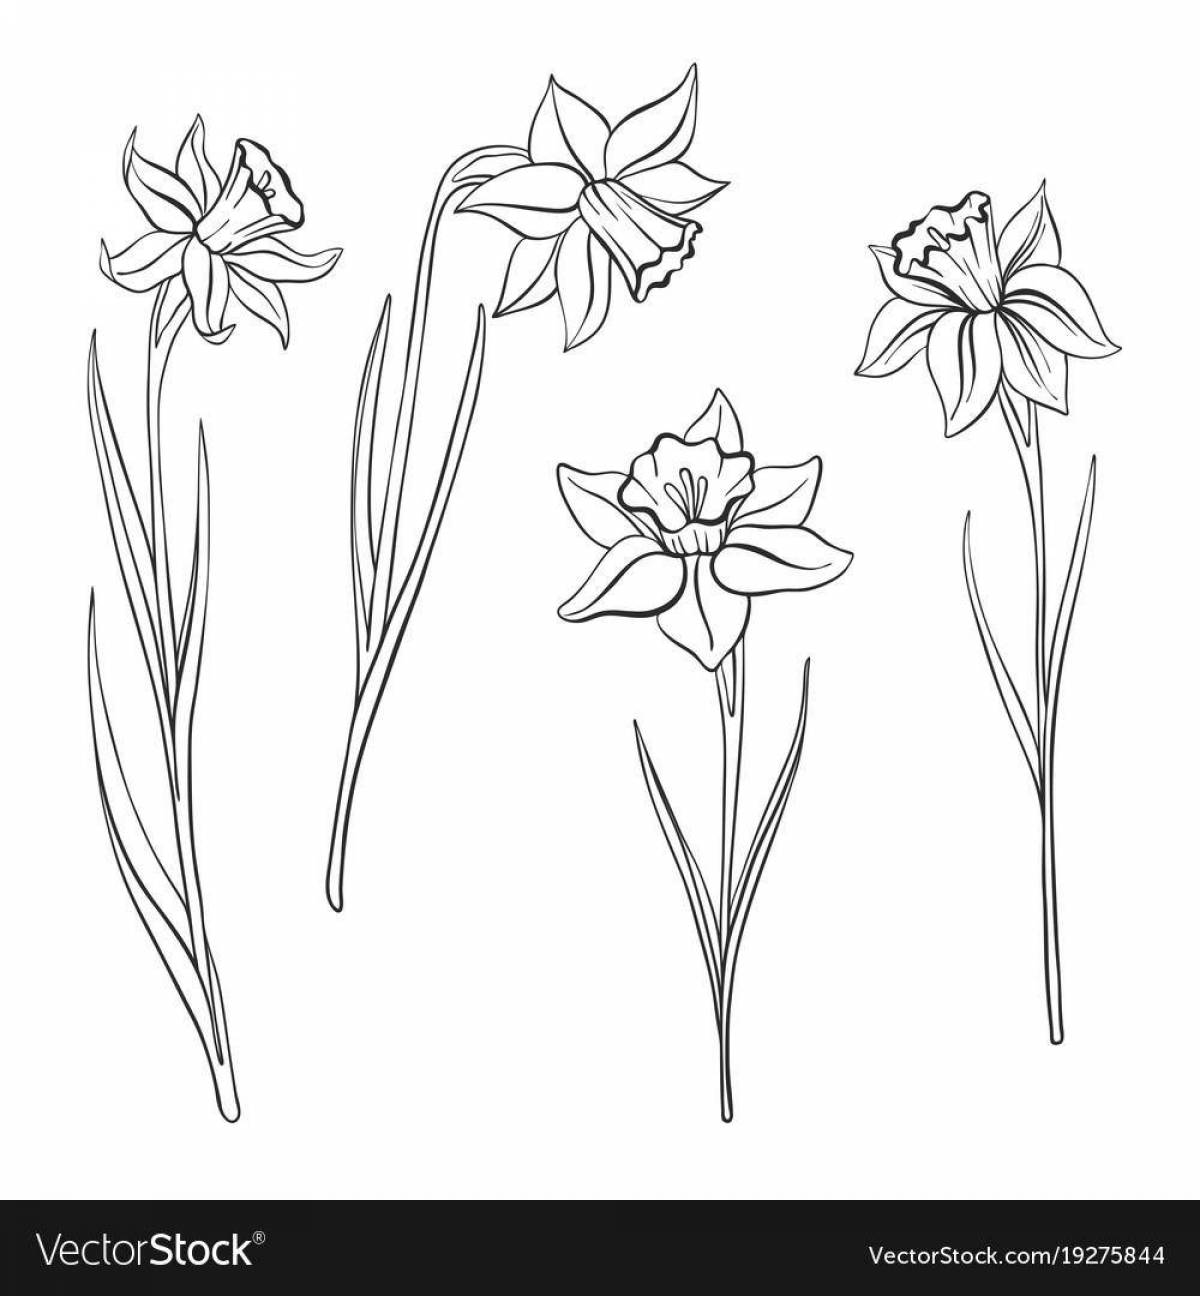 Coloring page dazzling unknown flower